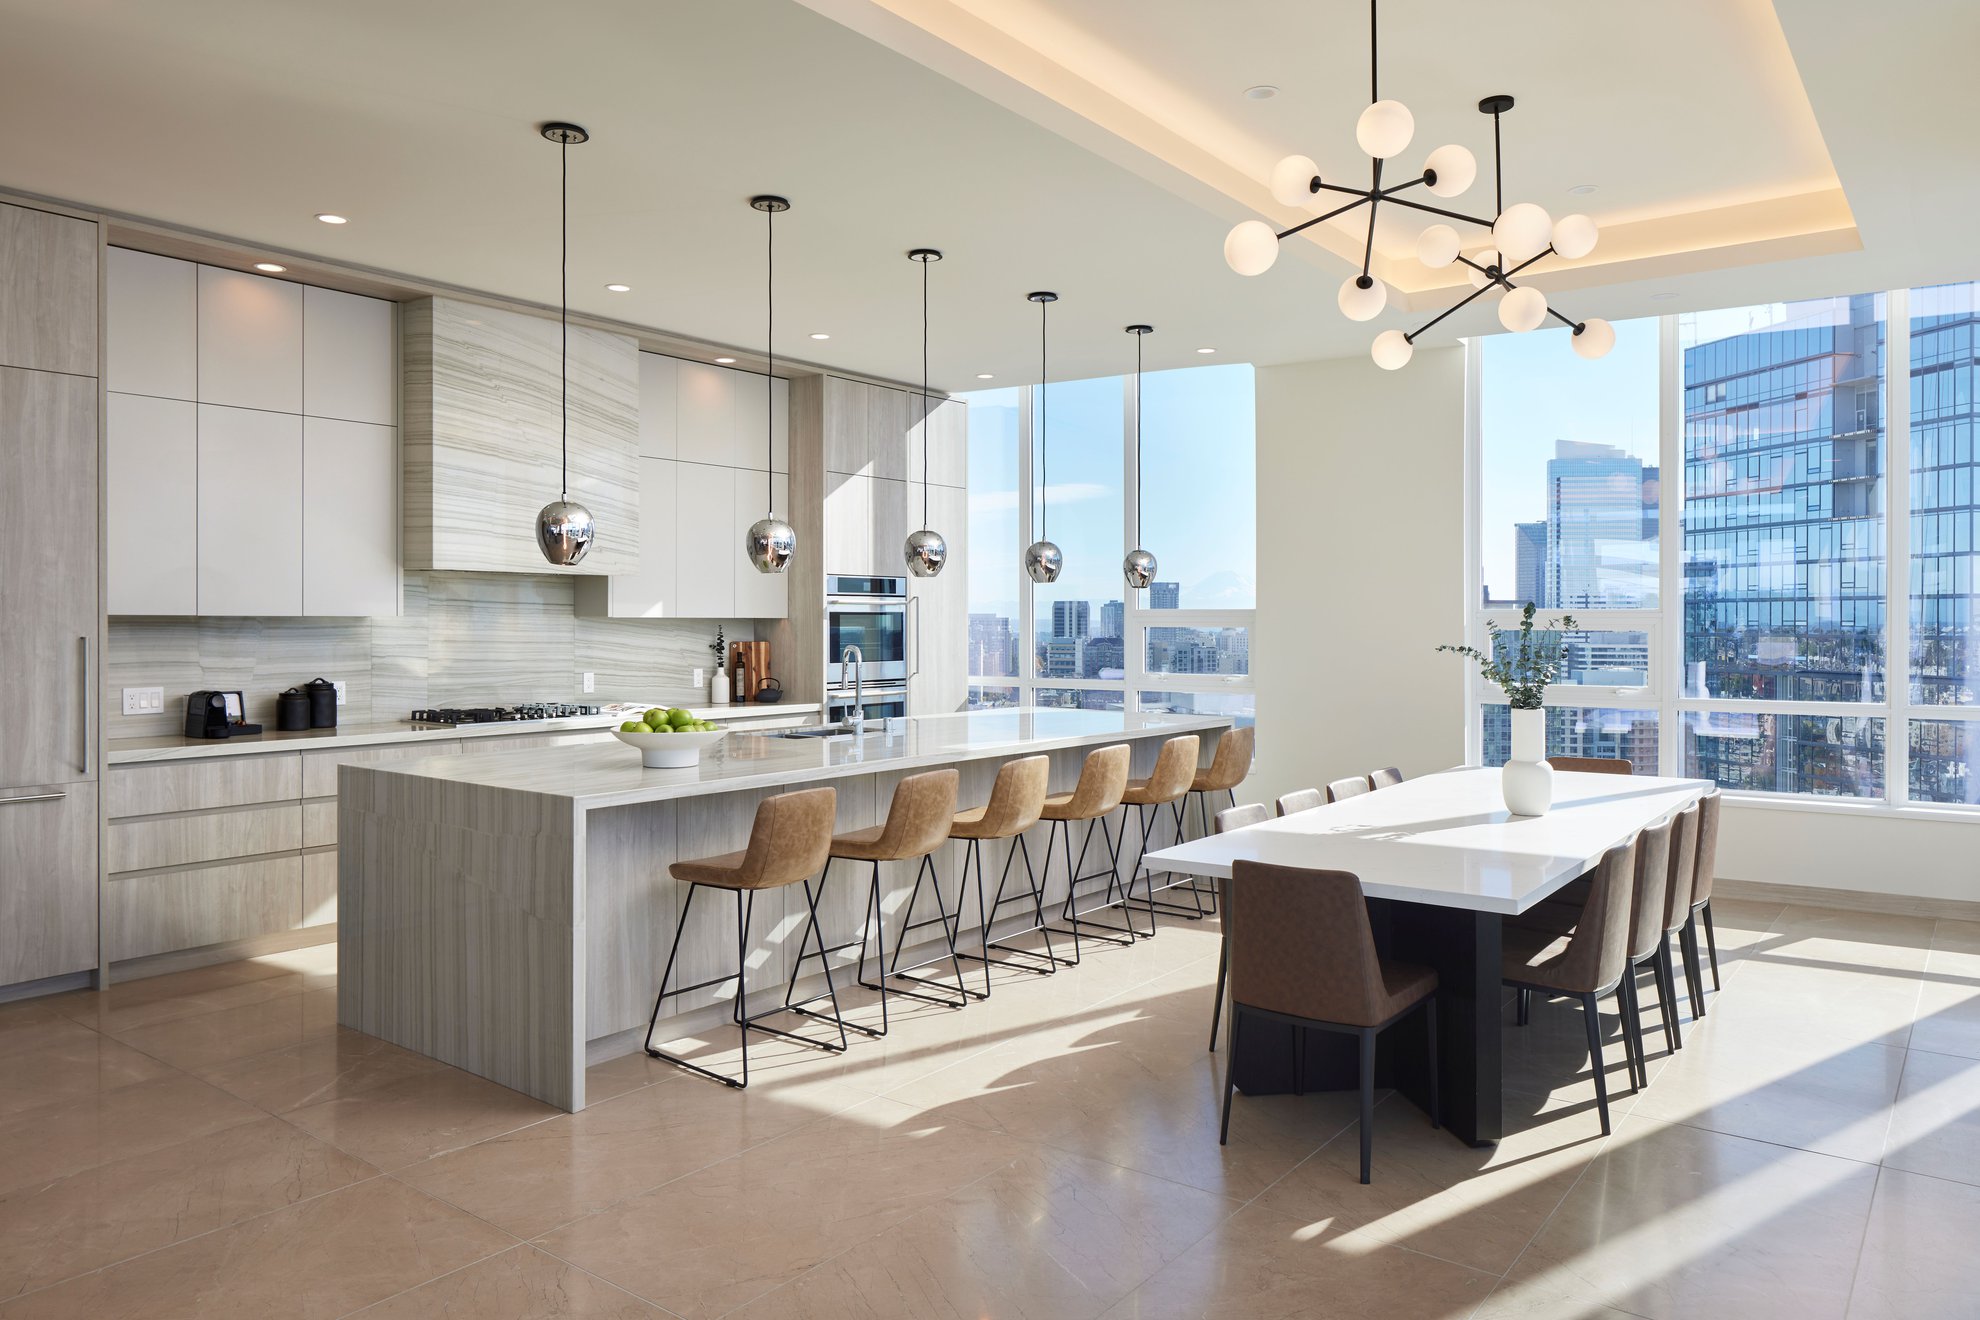 large kitchen with a dining area, long kitchen island, premium appliances and big window at level seattle oslu.jpg